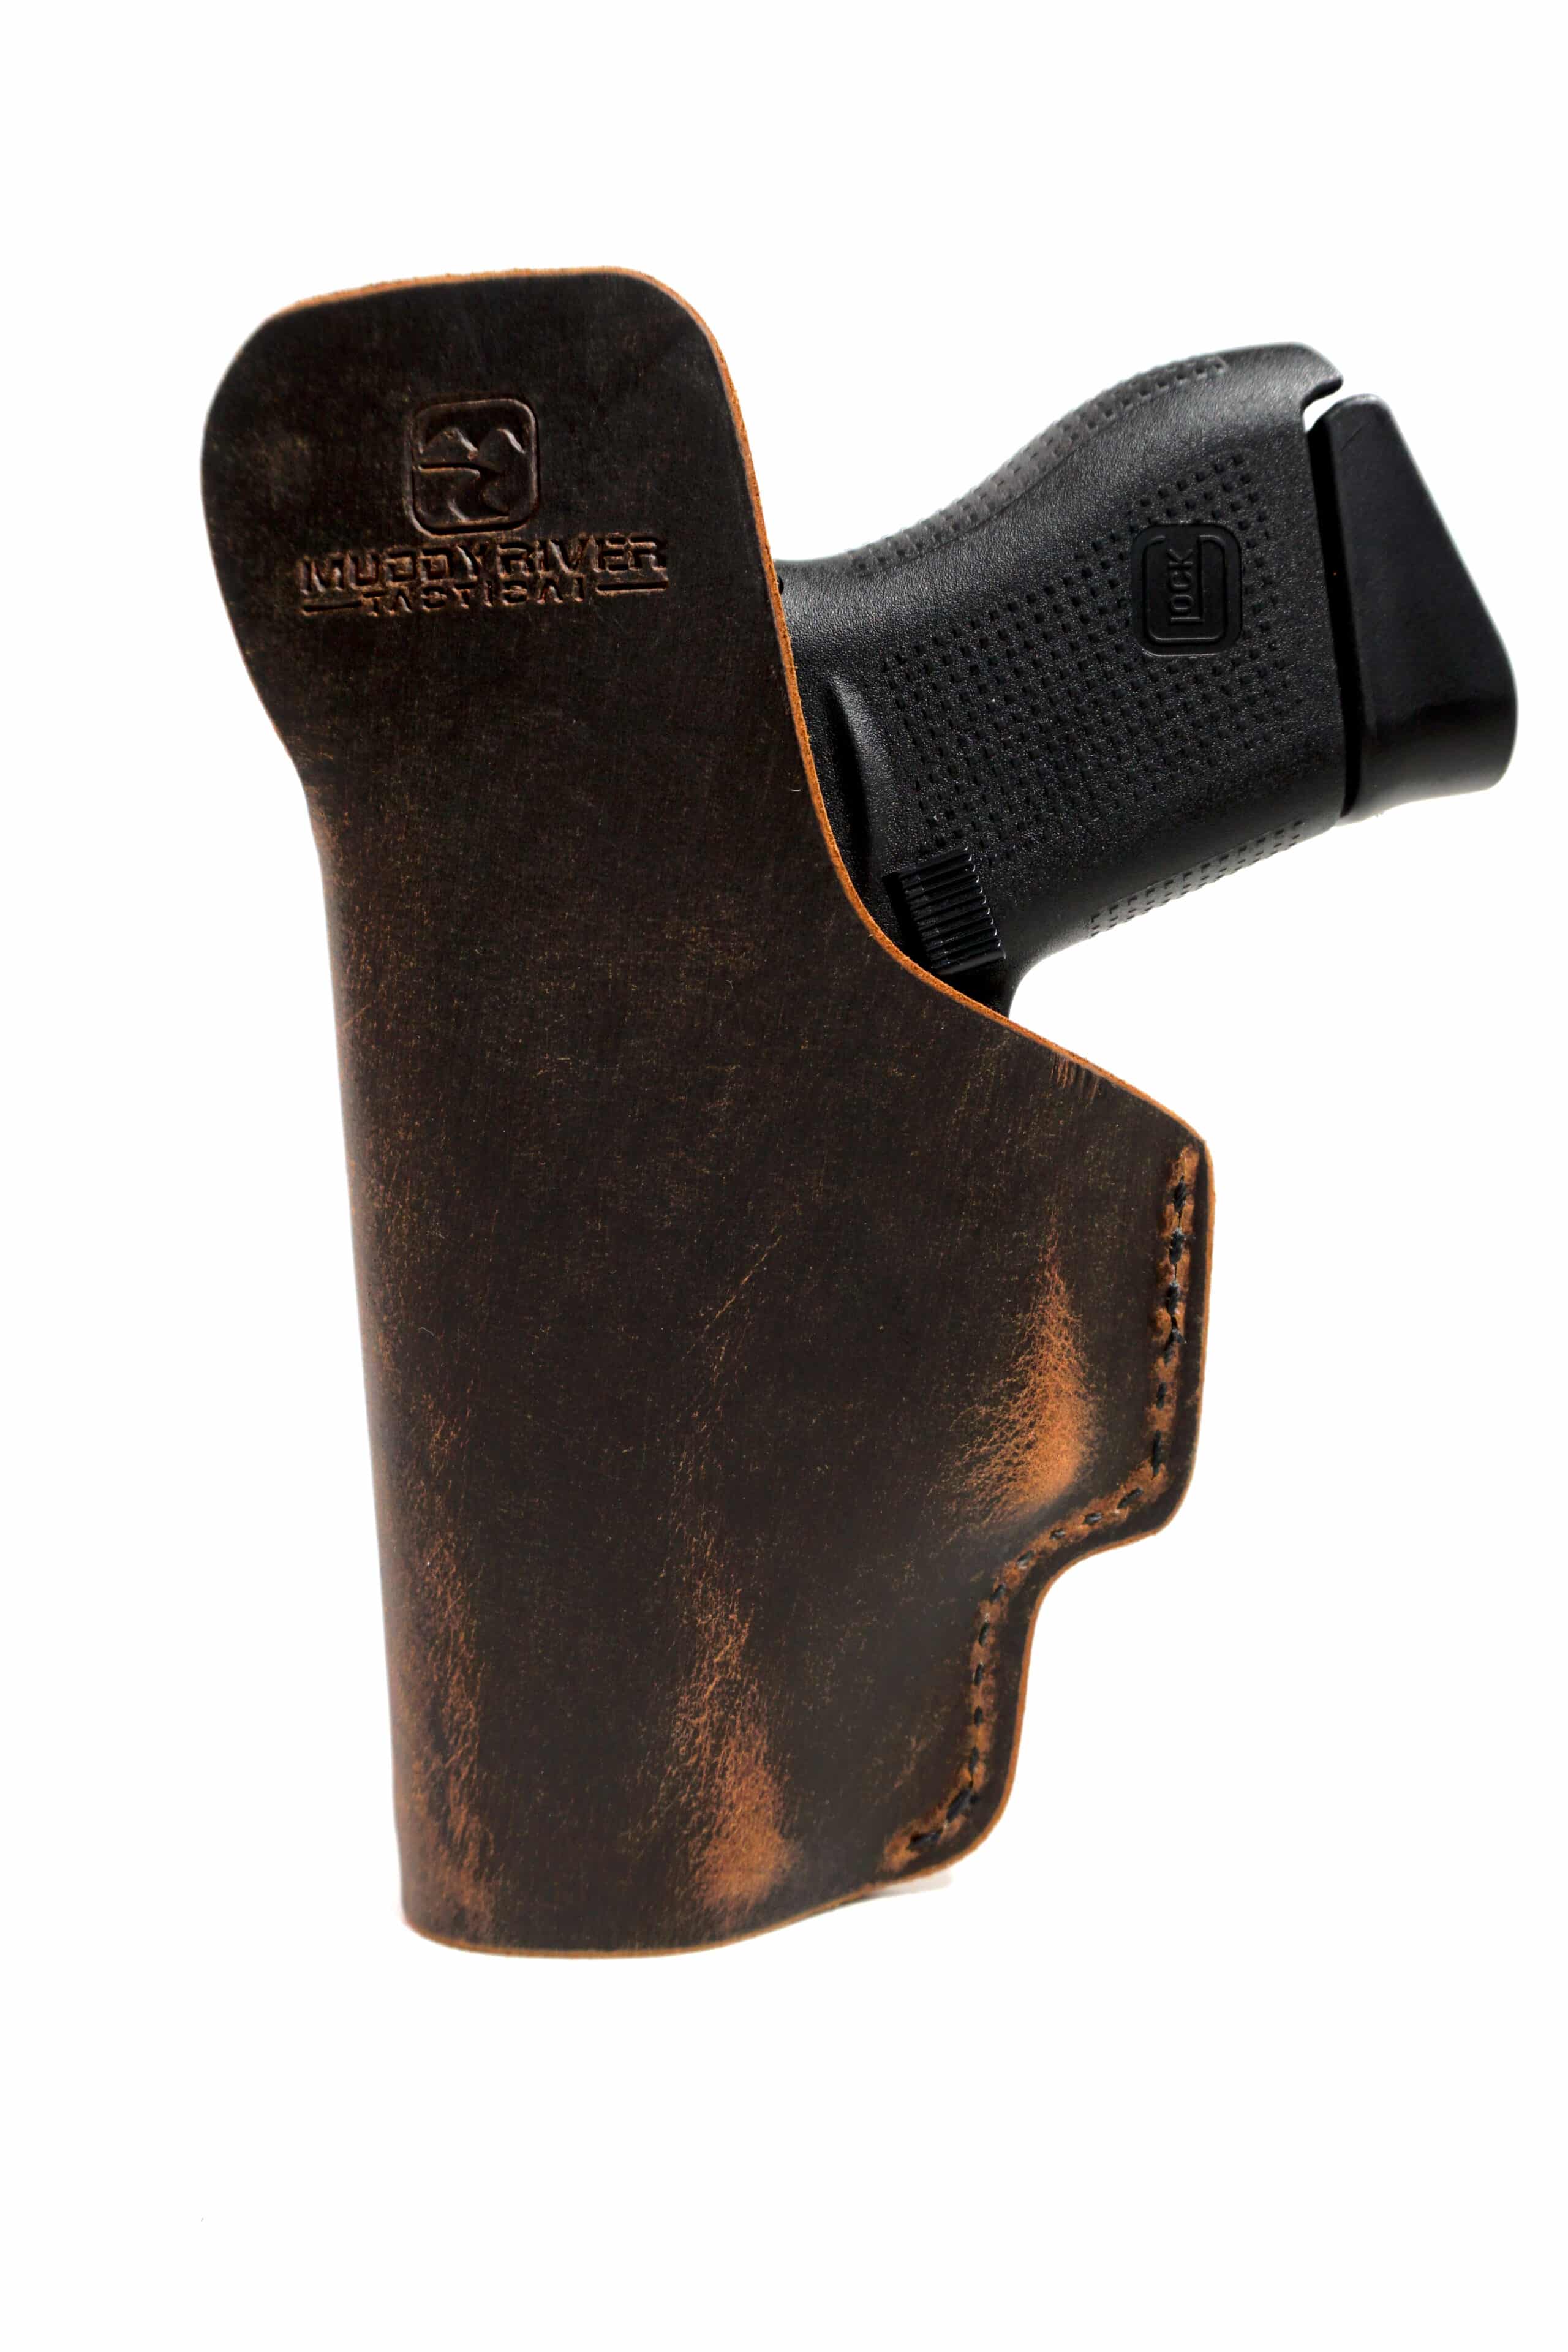 Details about   Pro Carry LT RH LH OWB IWB Leather Gun Holster For Beretta PX Storm SUB Compact 